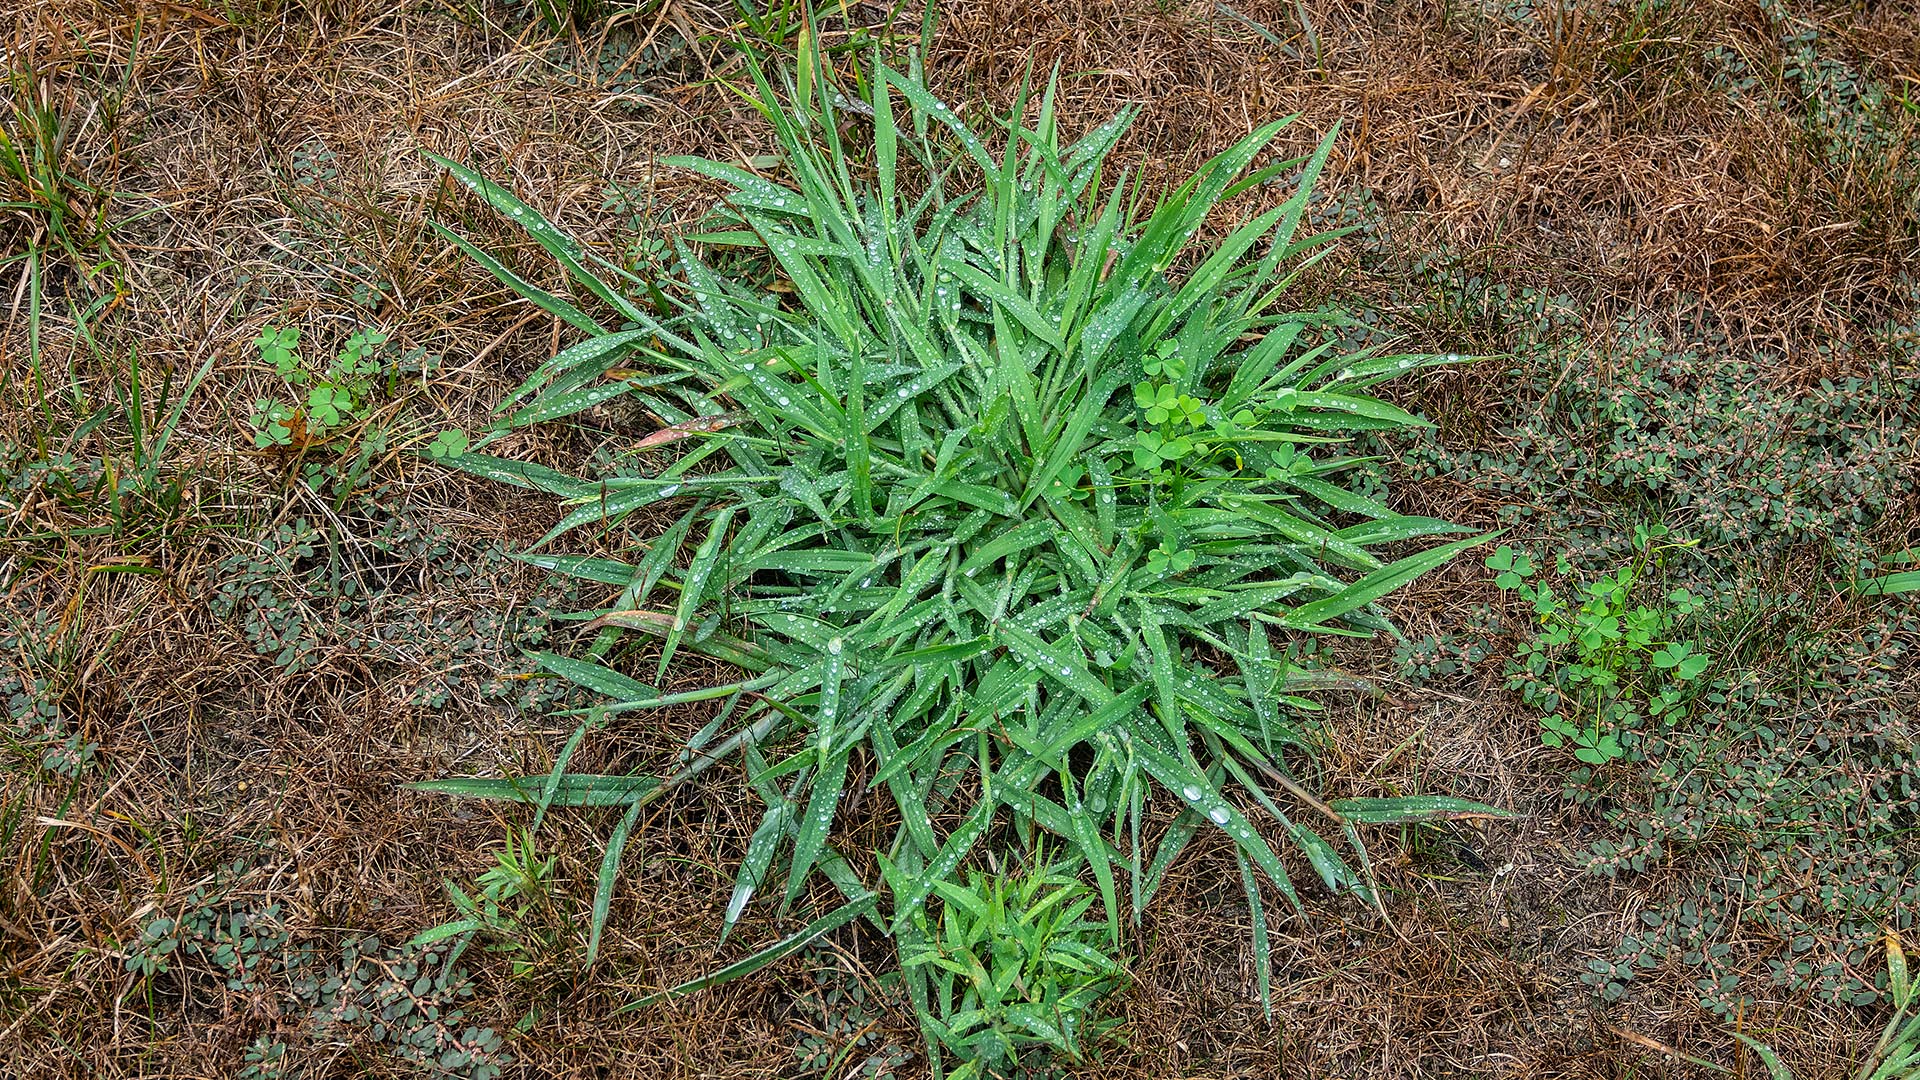 Crabgrass - Your Lawn’s Worst Enemy!